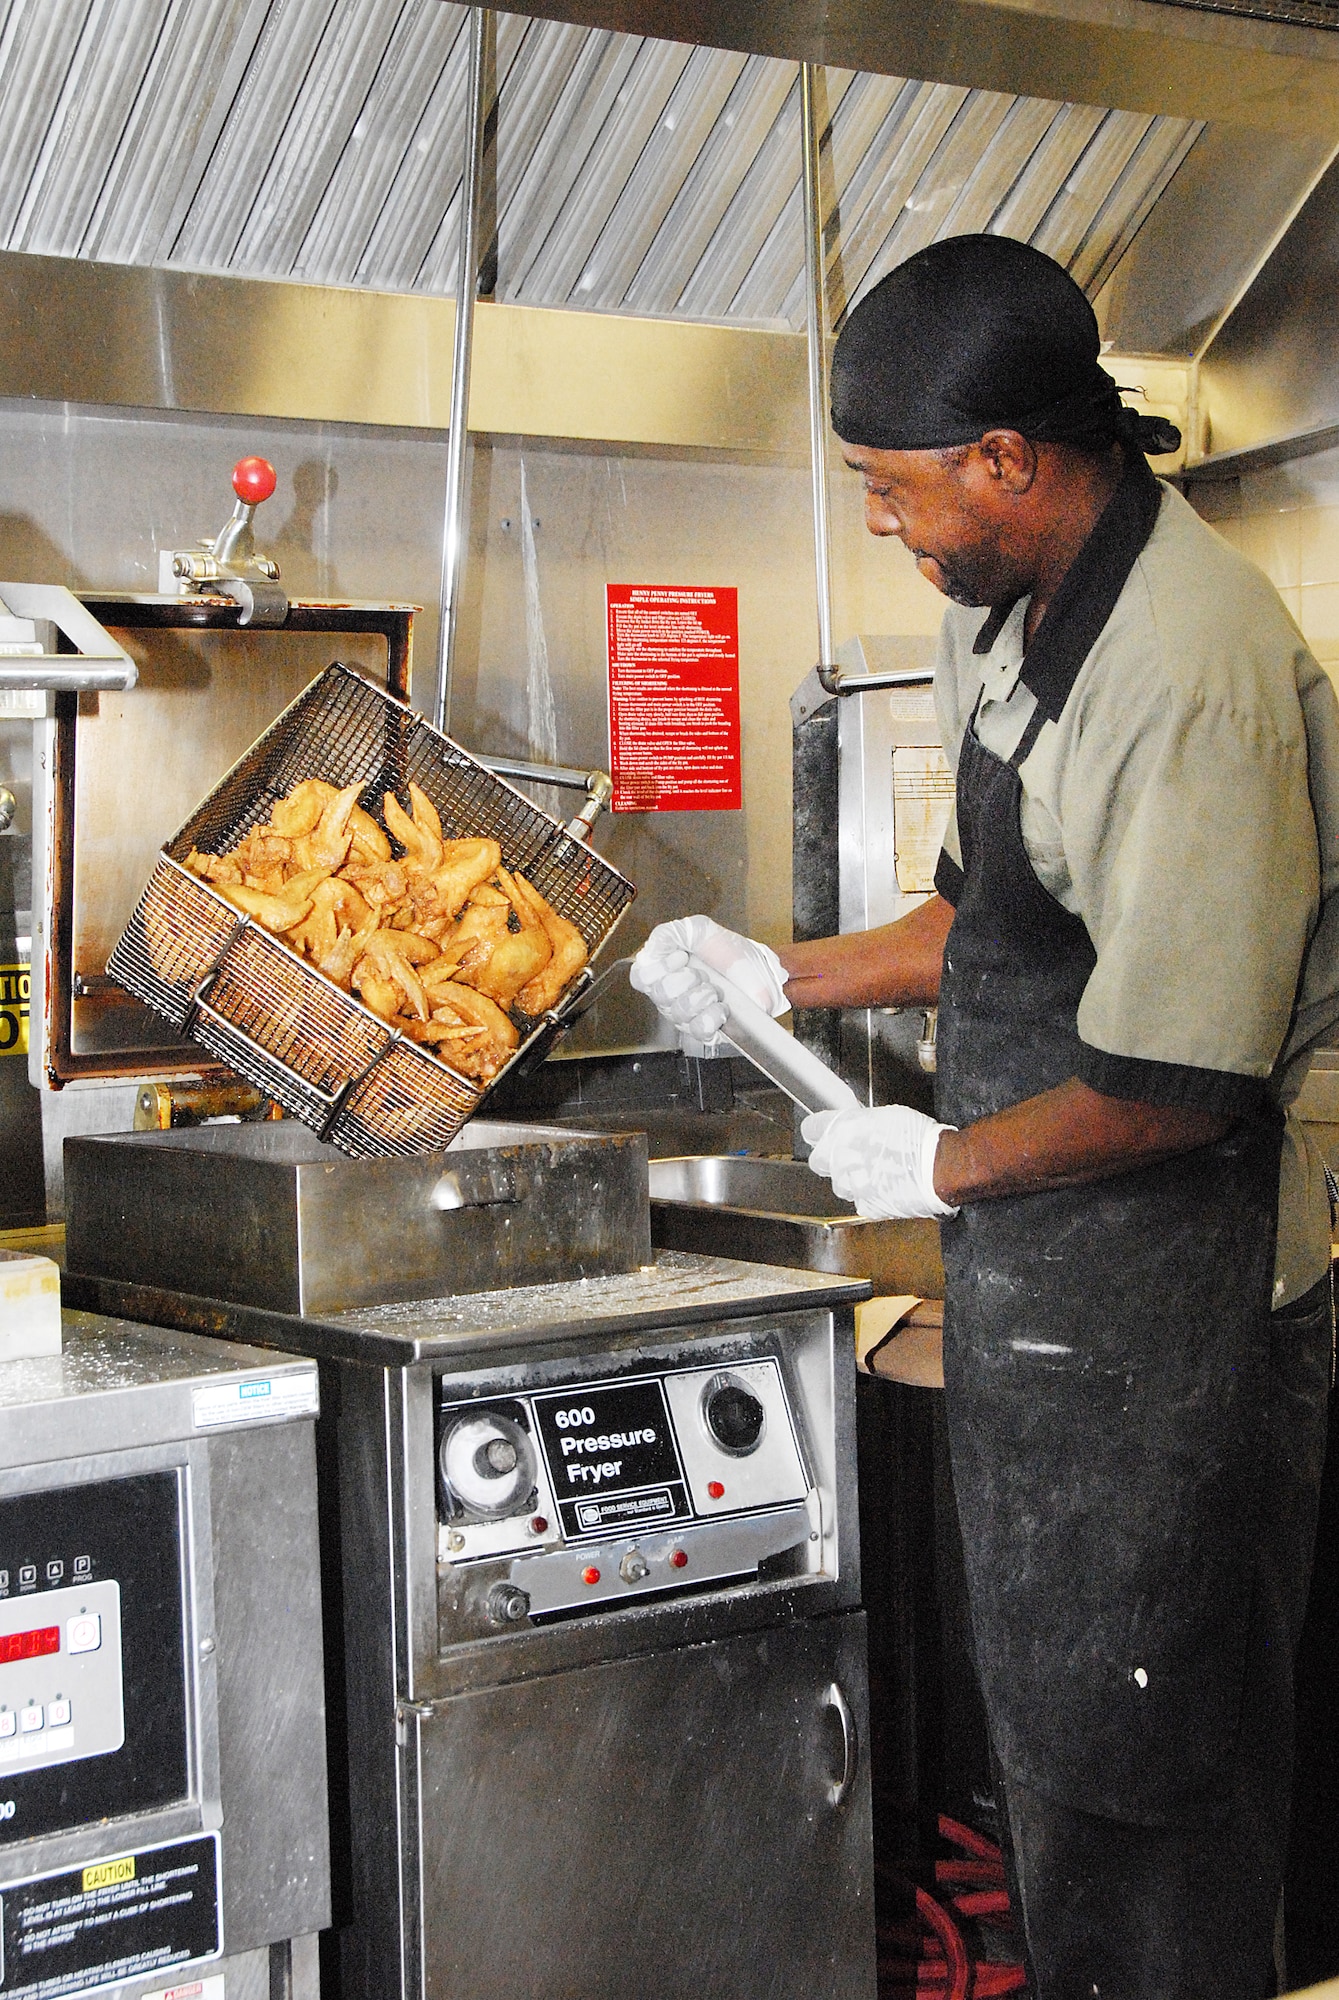 Anthony Nobles removes fried chicken from the deep fryer. Nobles said he may fry around 200 lbs of chicken to prepare for the lunch crowd.(U. S. Air Force photo/Misuzu Allen)